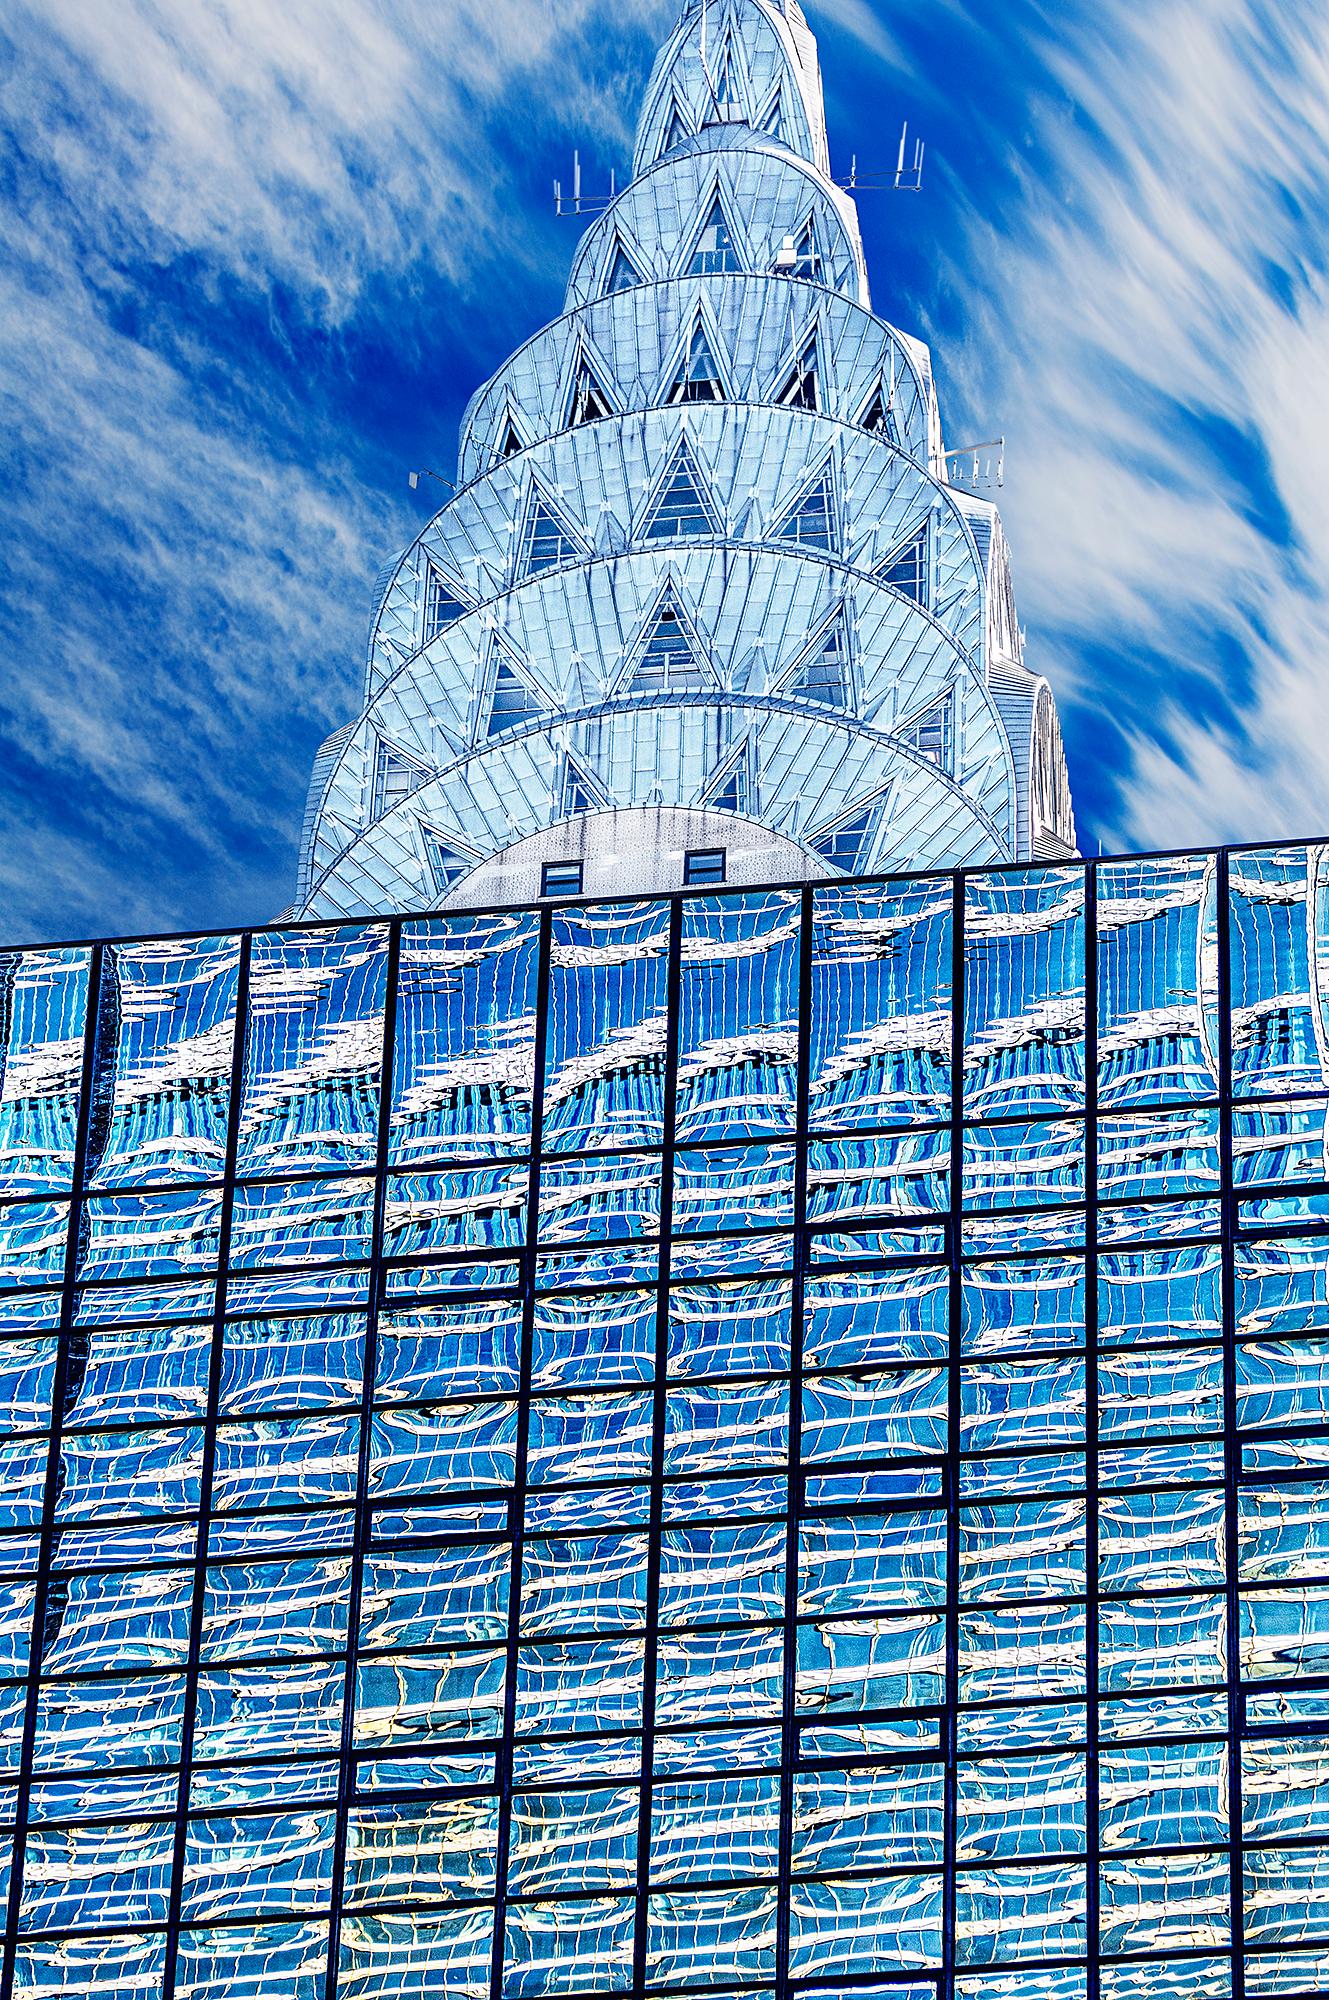 Mitchell Funk Abstract Photograph - Chrysler Building Top,  Art Deco Architecture Blue And Silver